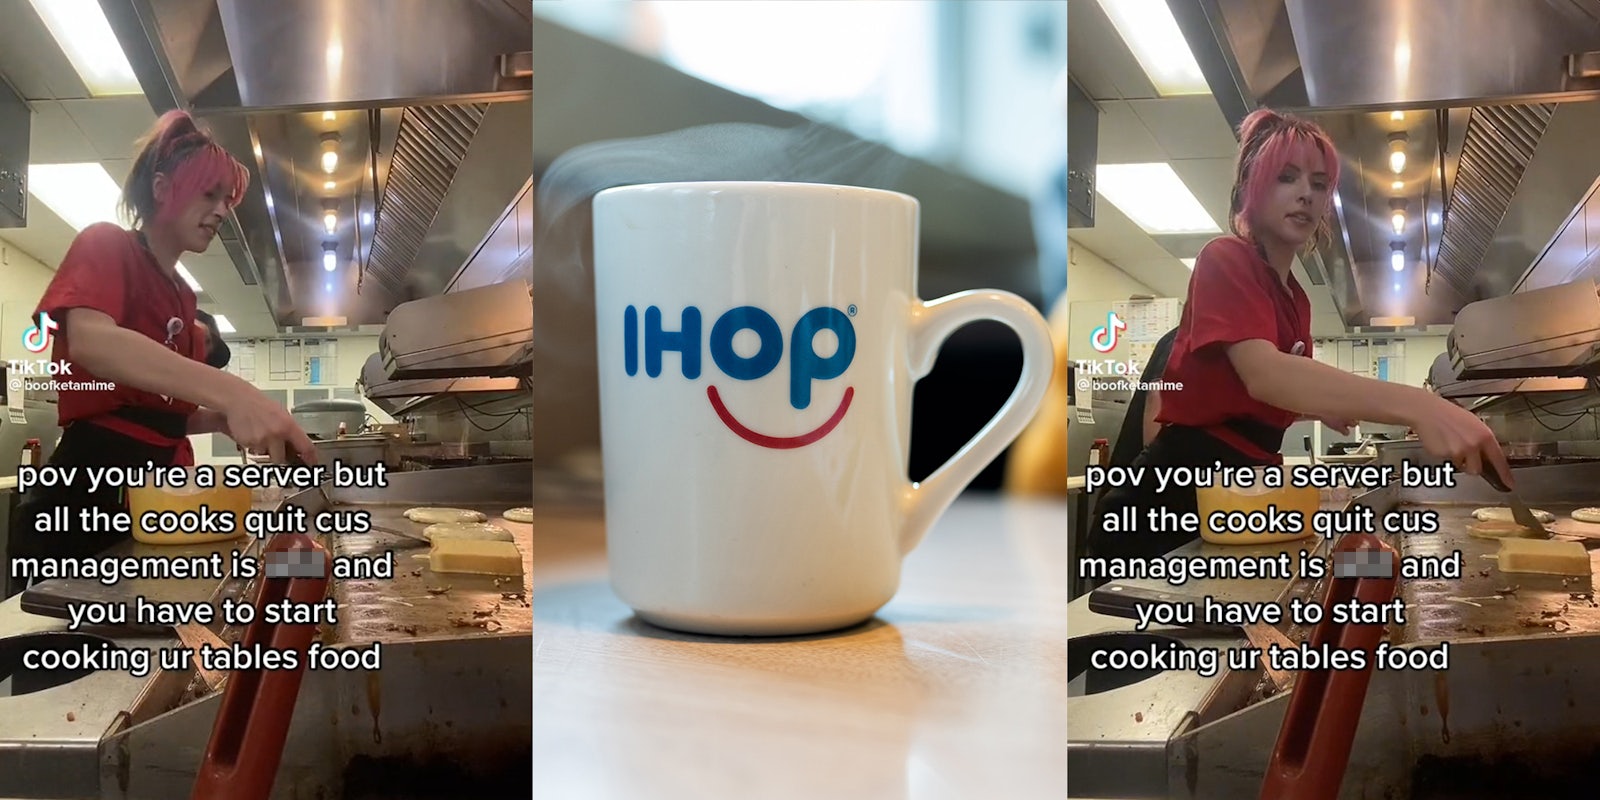 IHOP server preparing food on griddle with caption 'pov you're a server but all the cooks quit cus the management is shit and you have to start cooking ur tables food' (l&r) ihop mug (c)